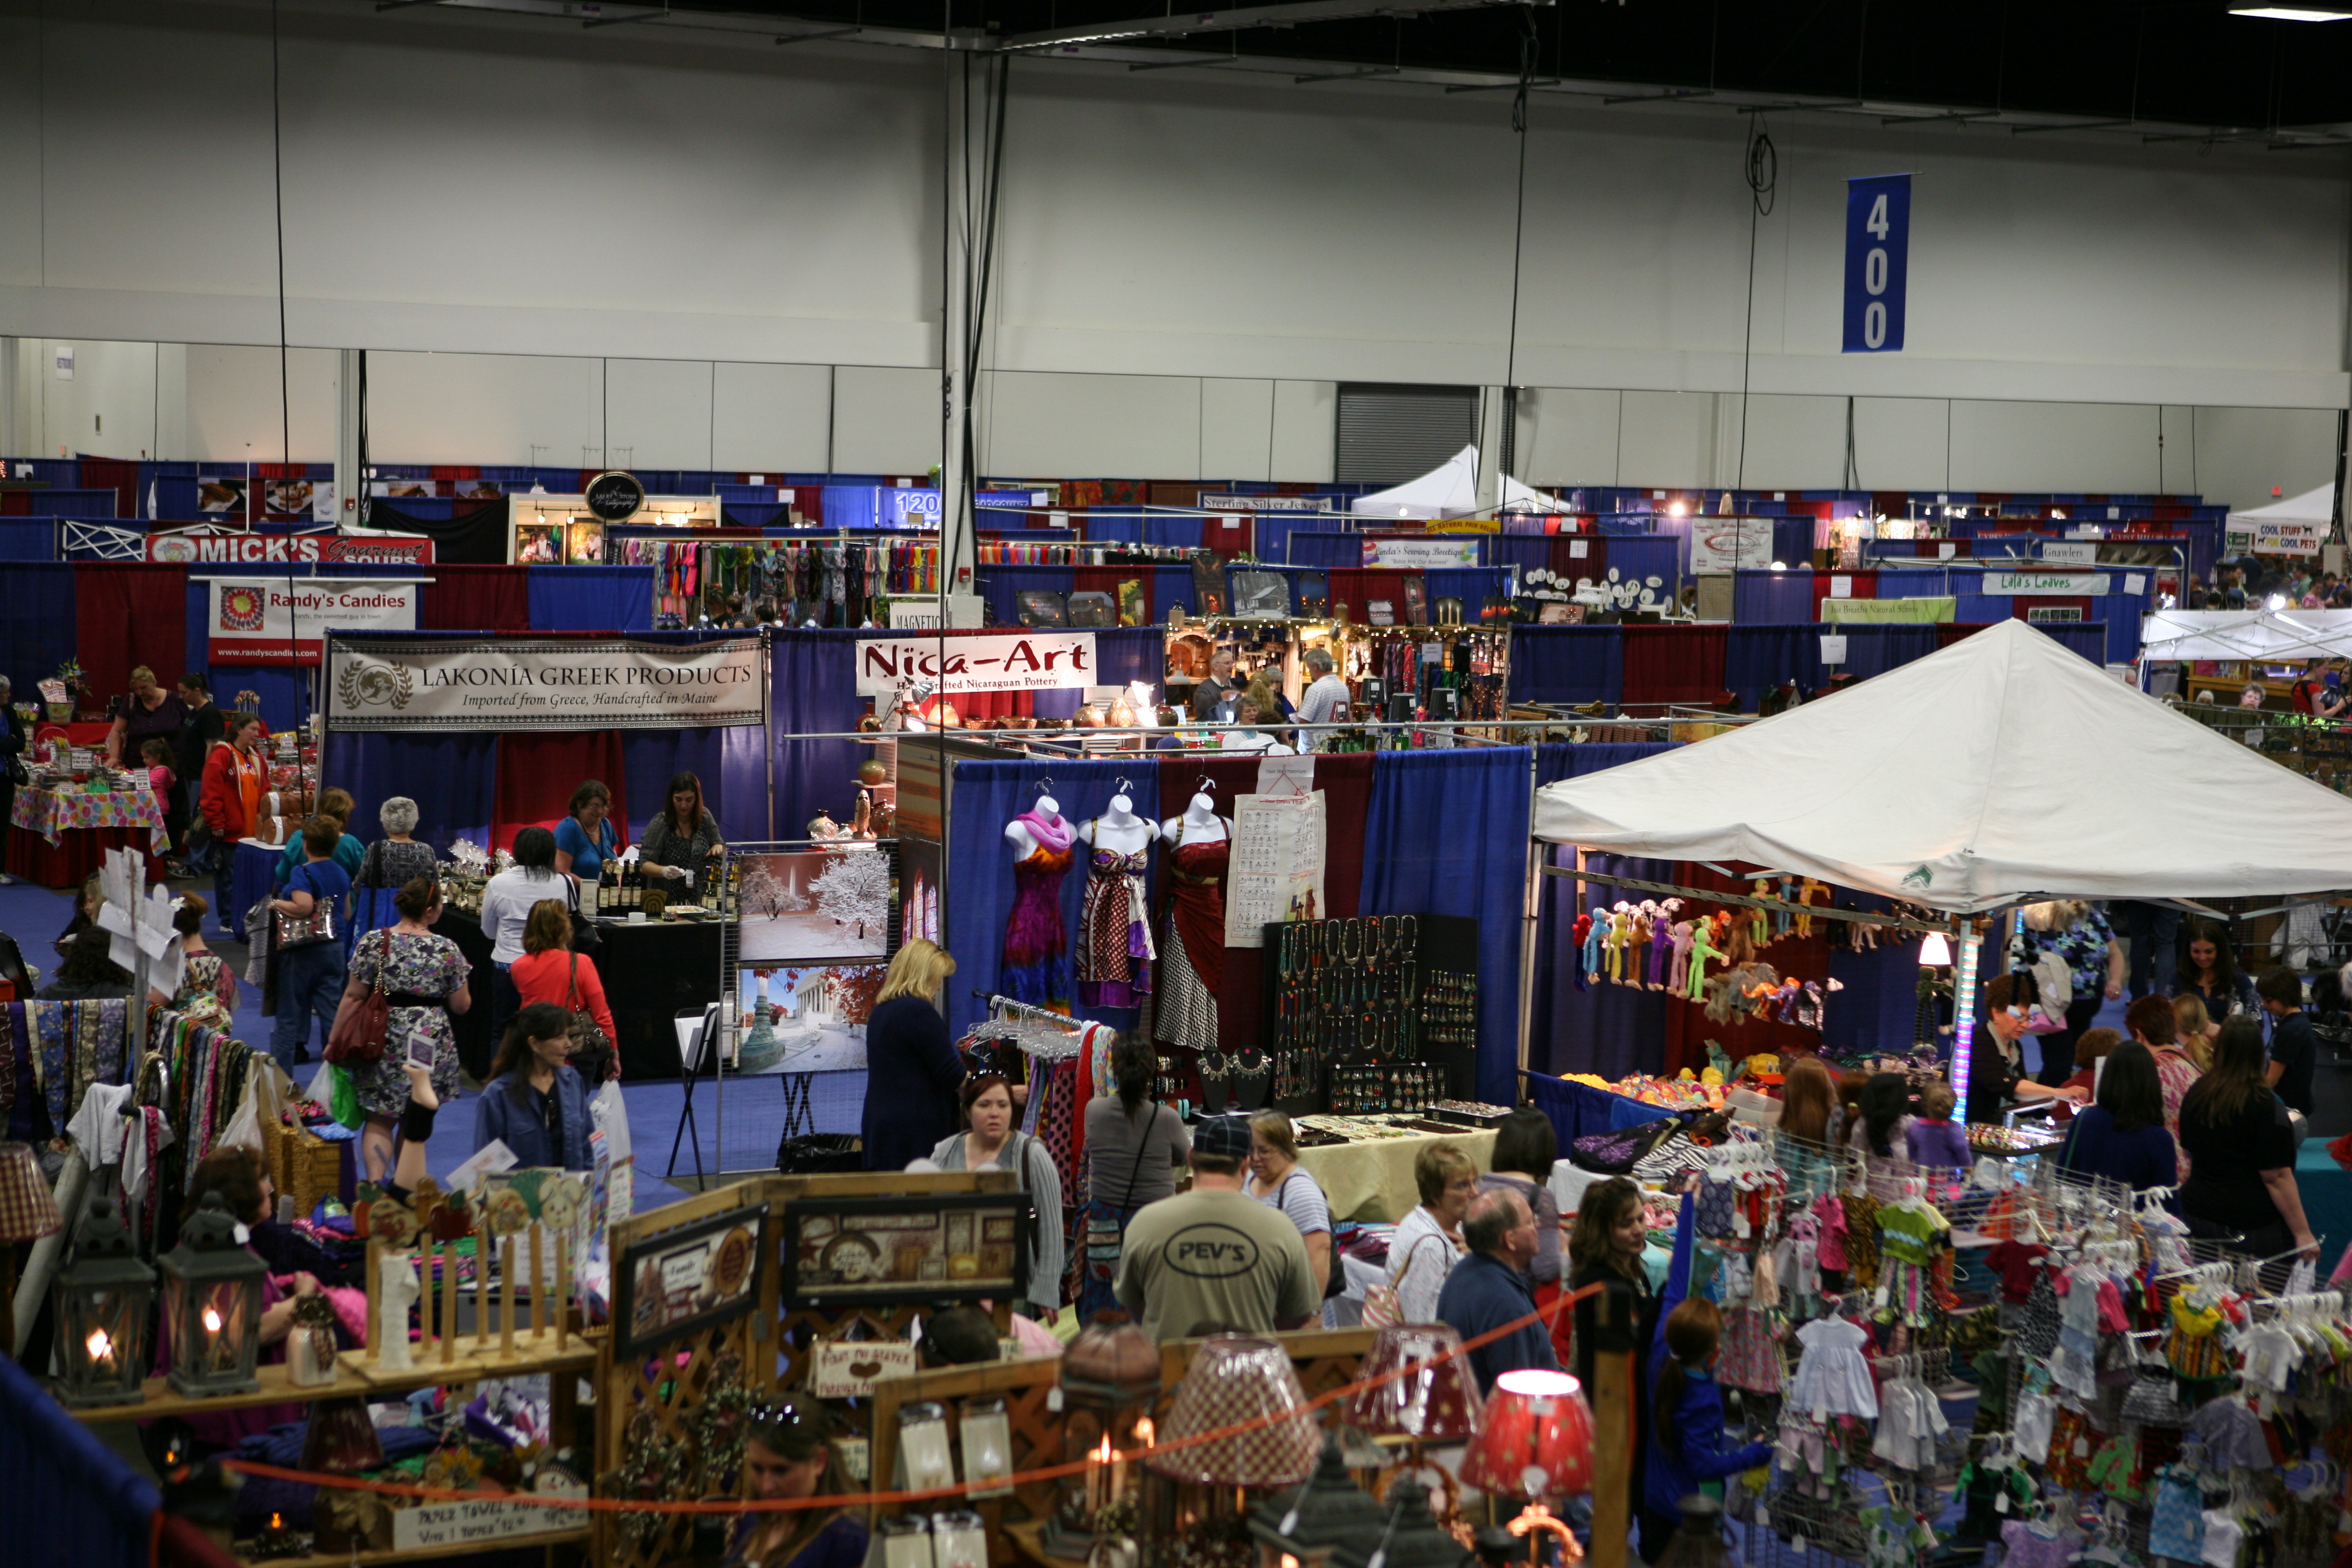 The Fredericksburg Spring Arts and Crafts Faire, April 78, at the Fredericksburg Expo Center is